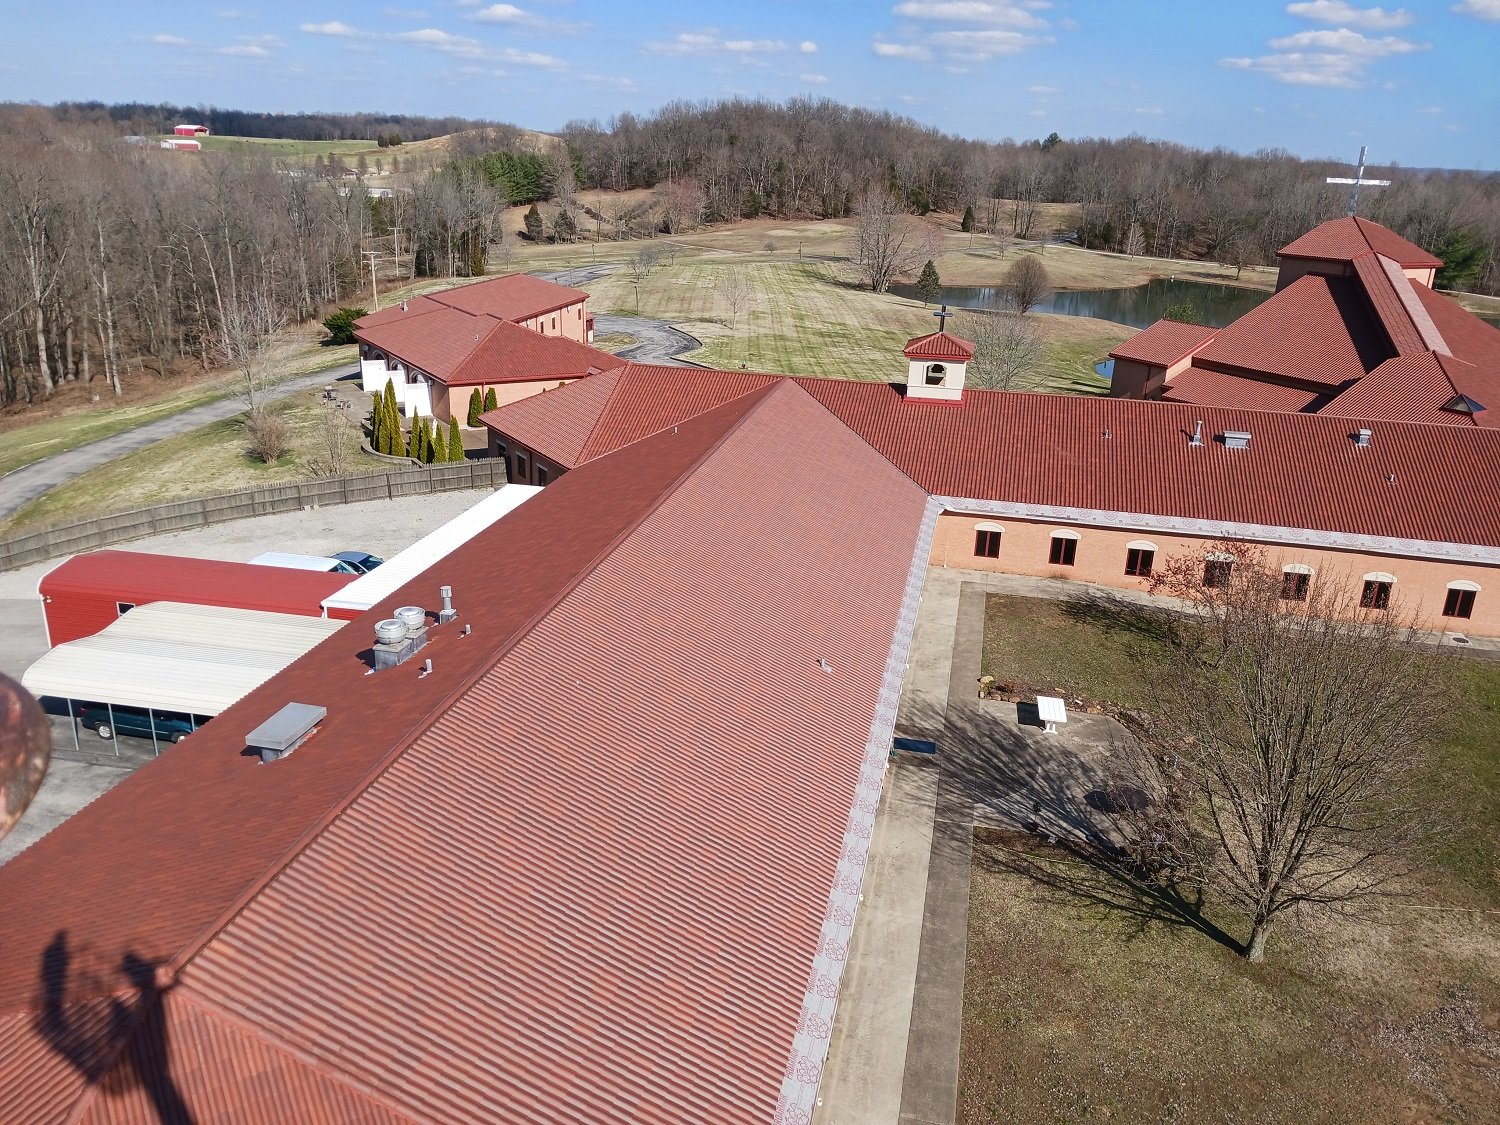 March 10 - The completed work wing roof, with Retreat House and chapel visible in background